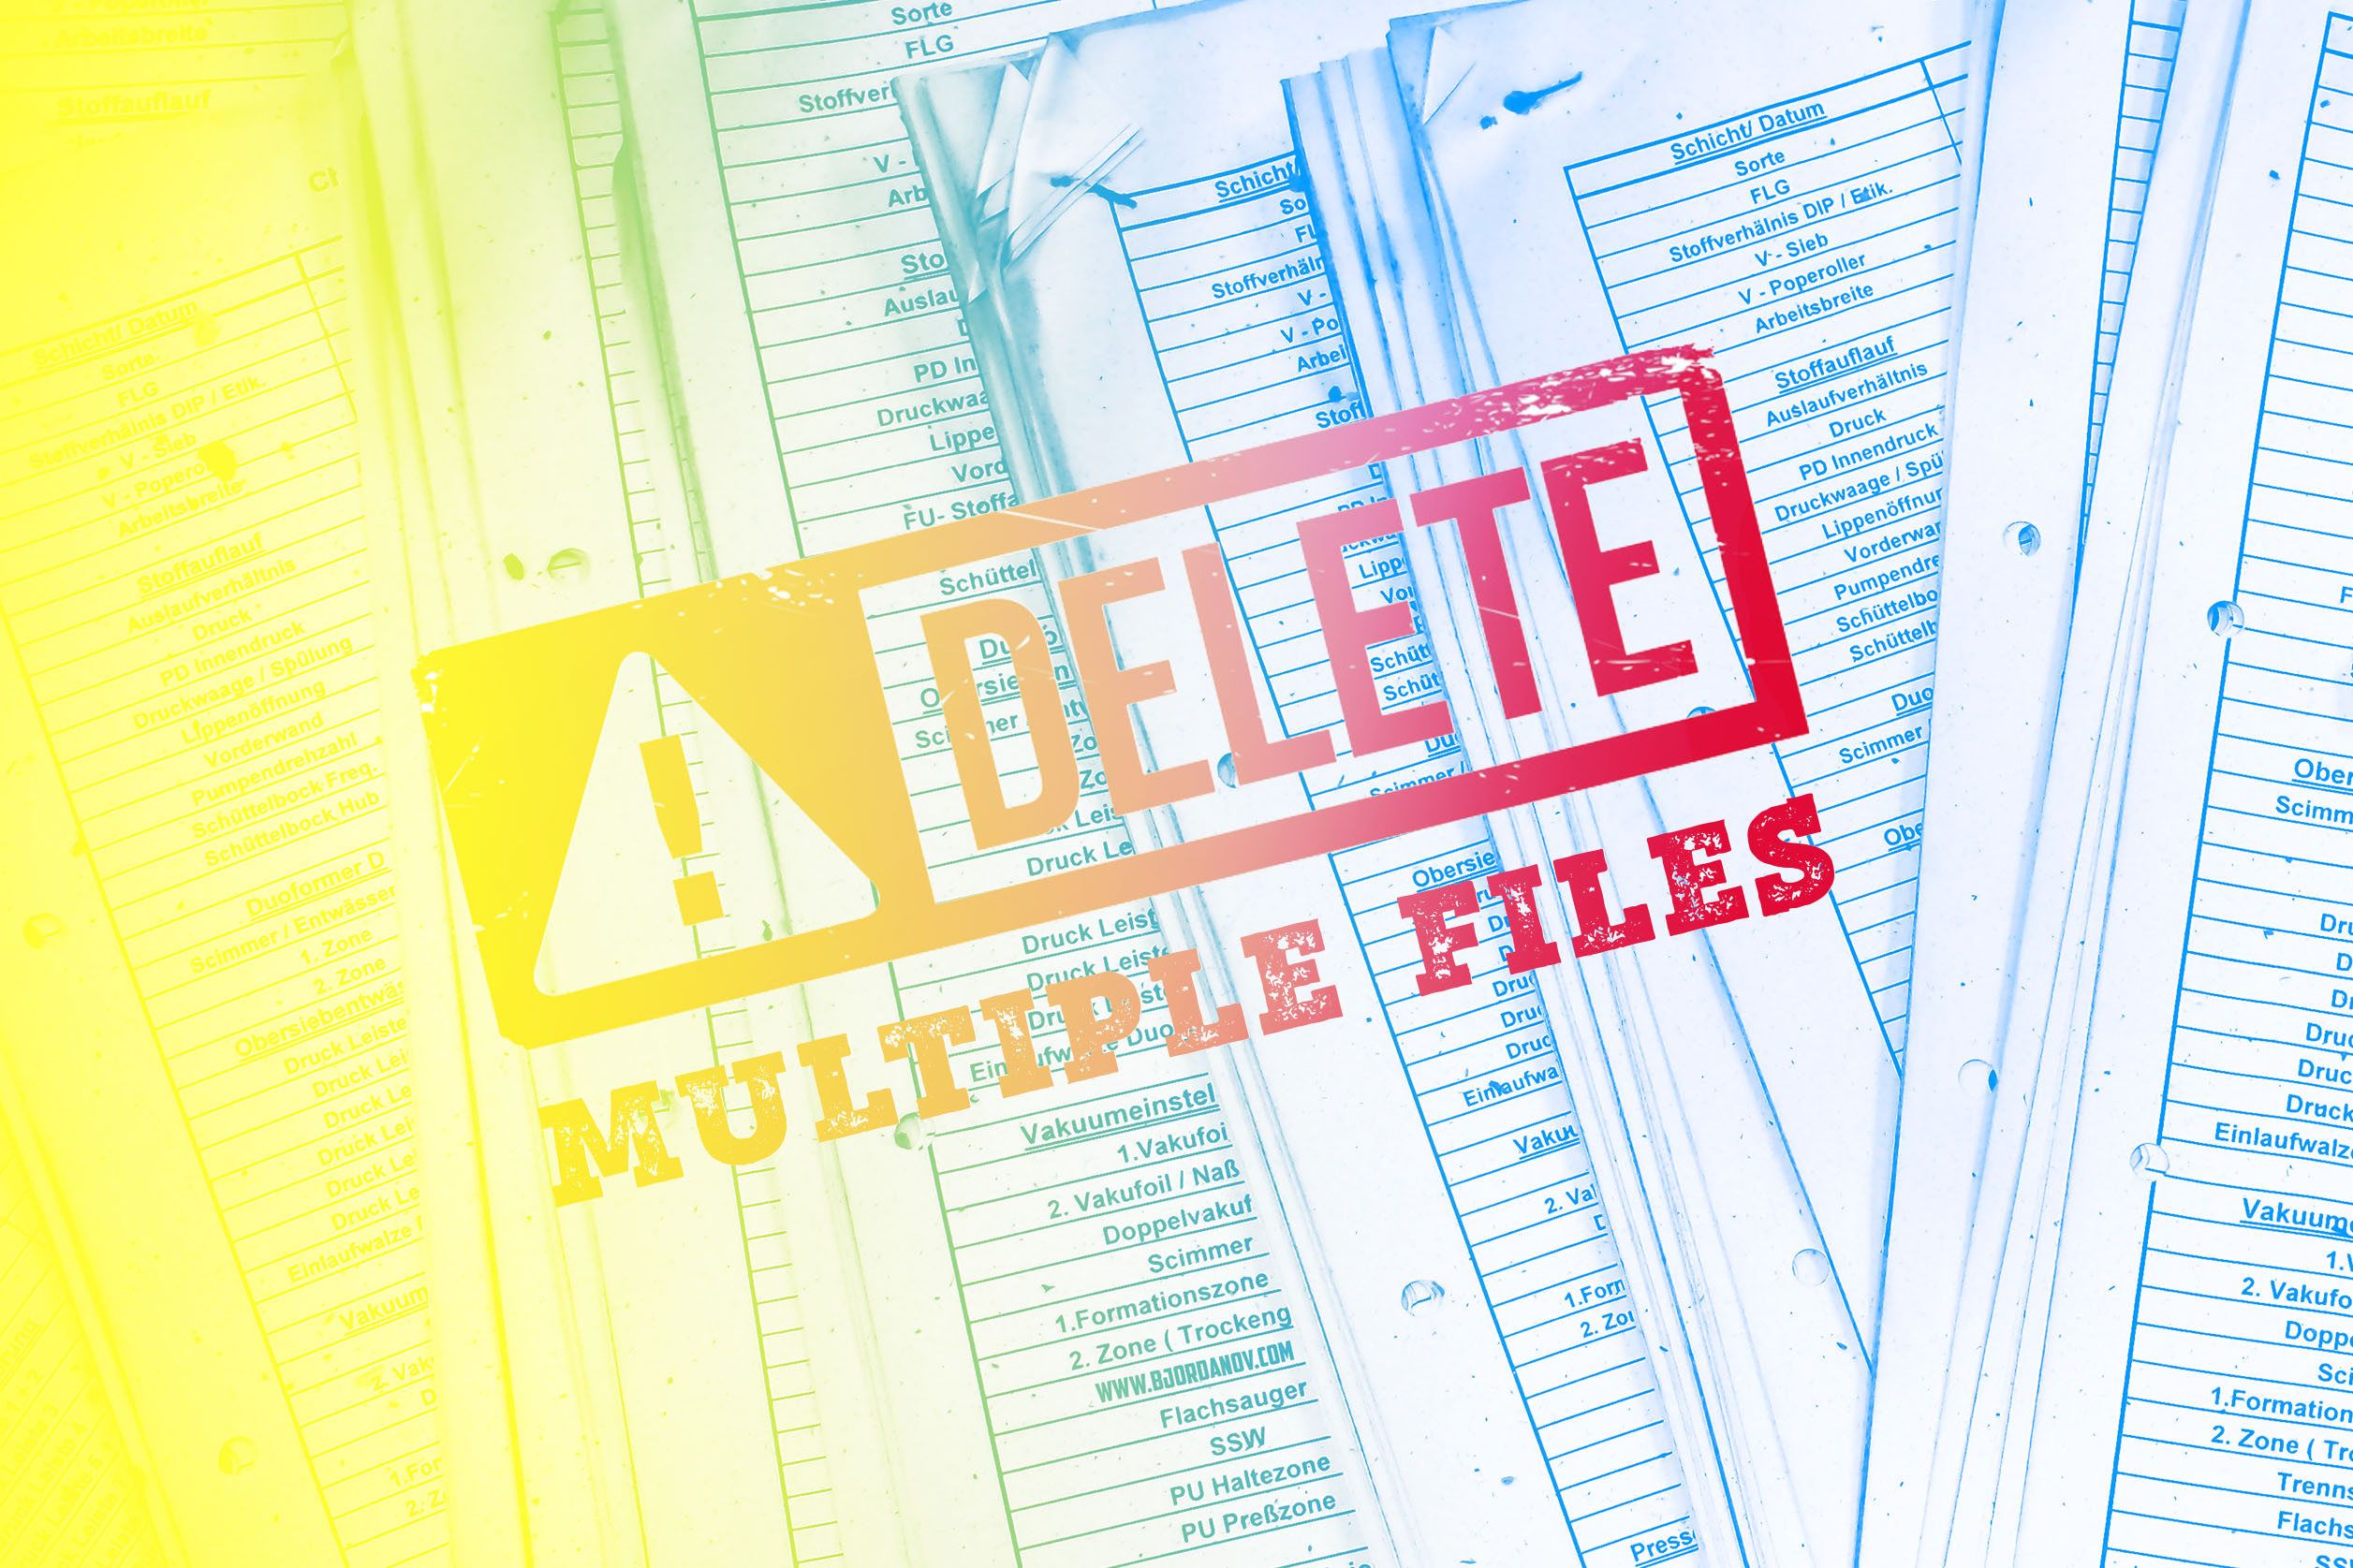 Delete all files with the same name